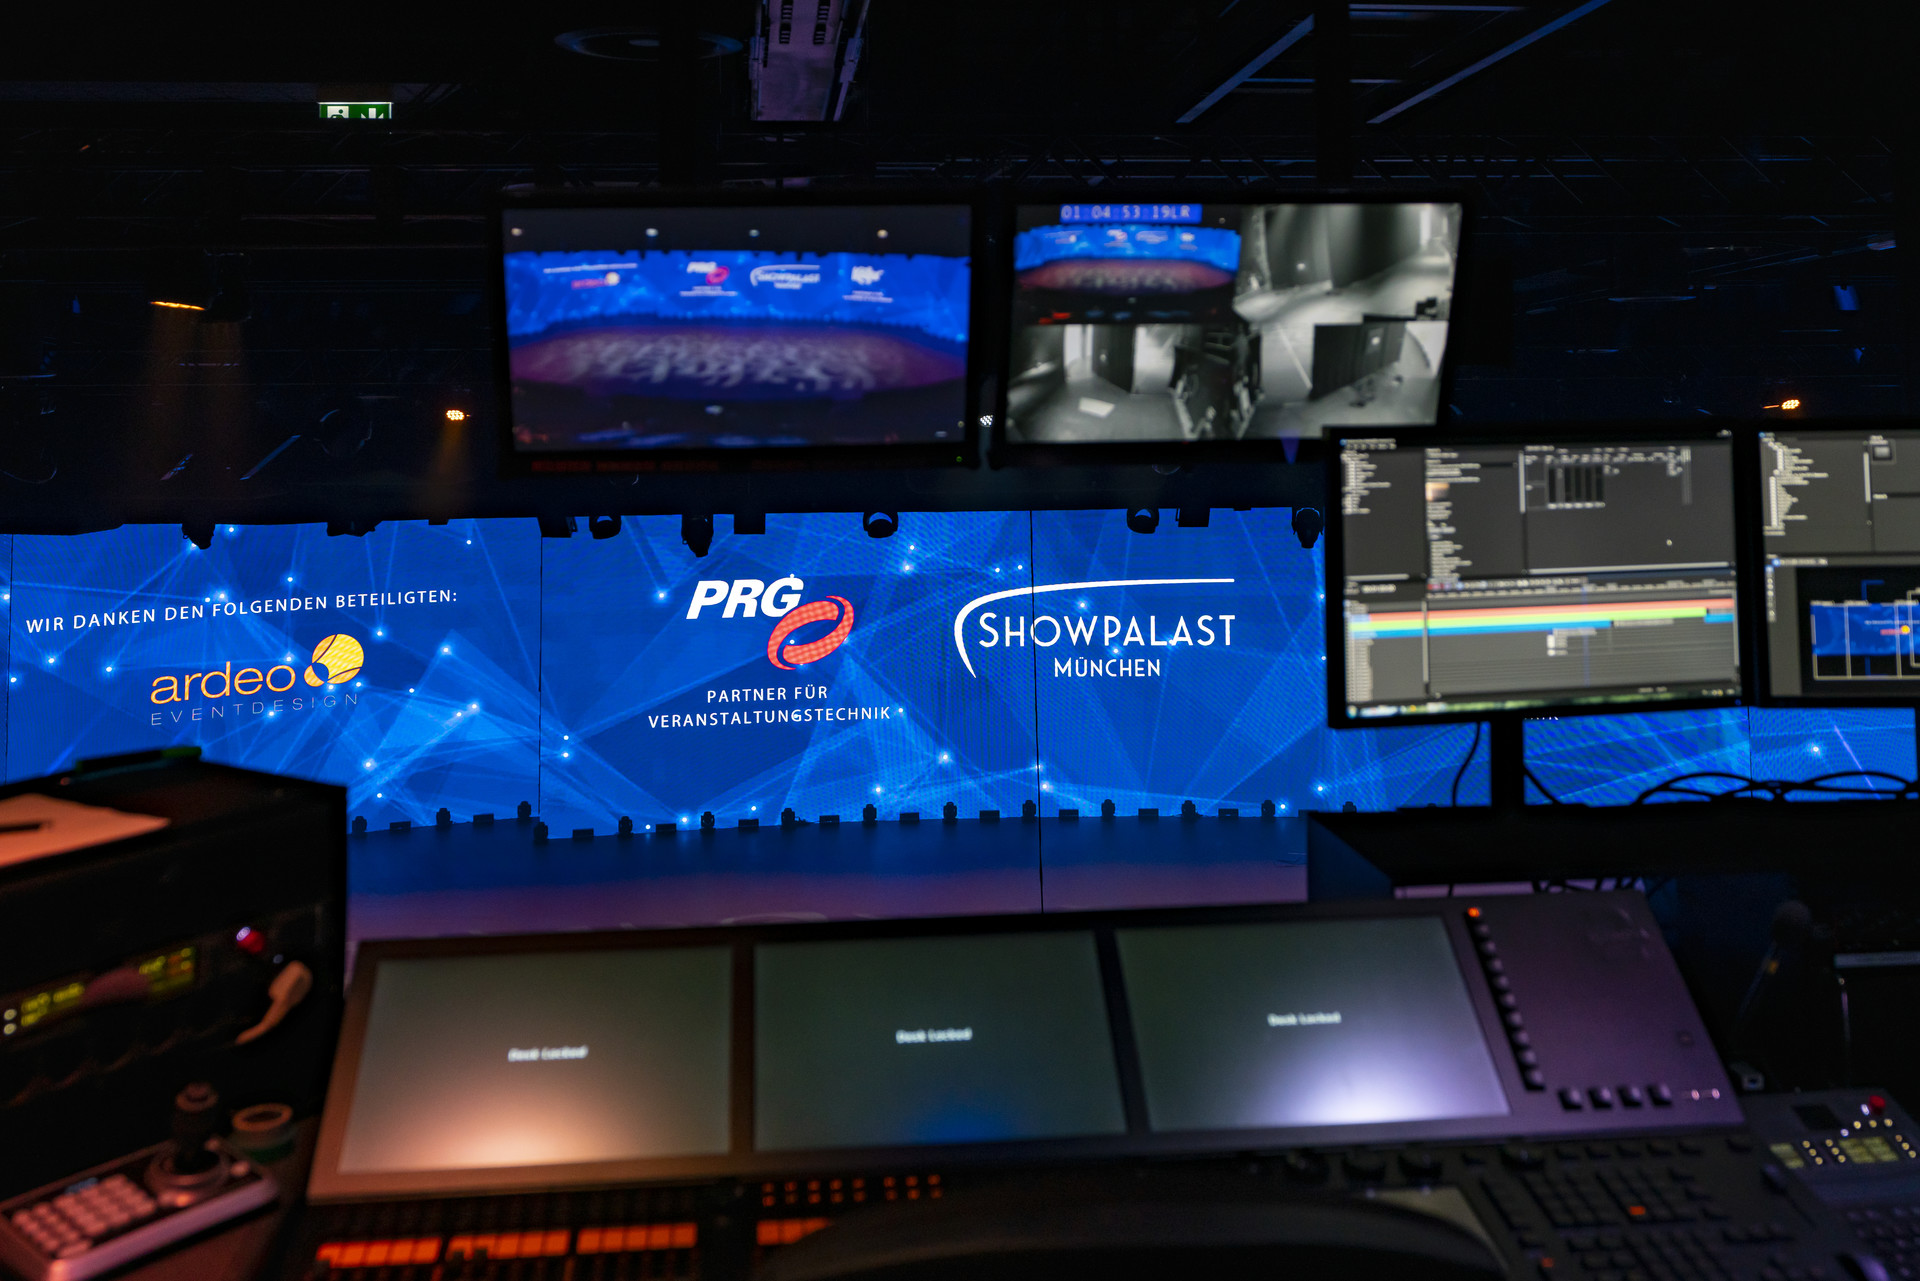 PRG is the exclusive technical service provider and official partner of the SHOWPALAST in Munich, ensuring optimal technical support at the highest level.